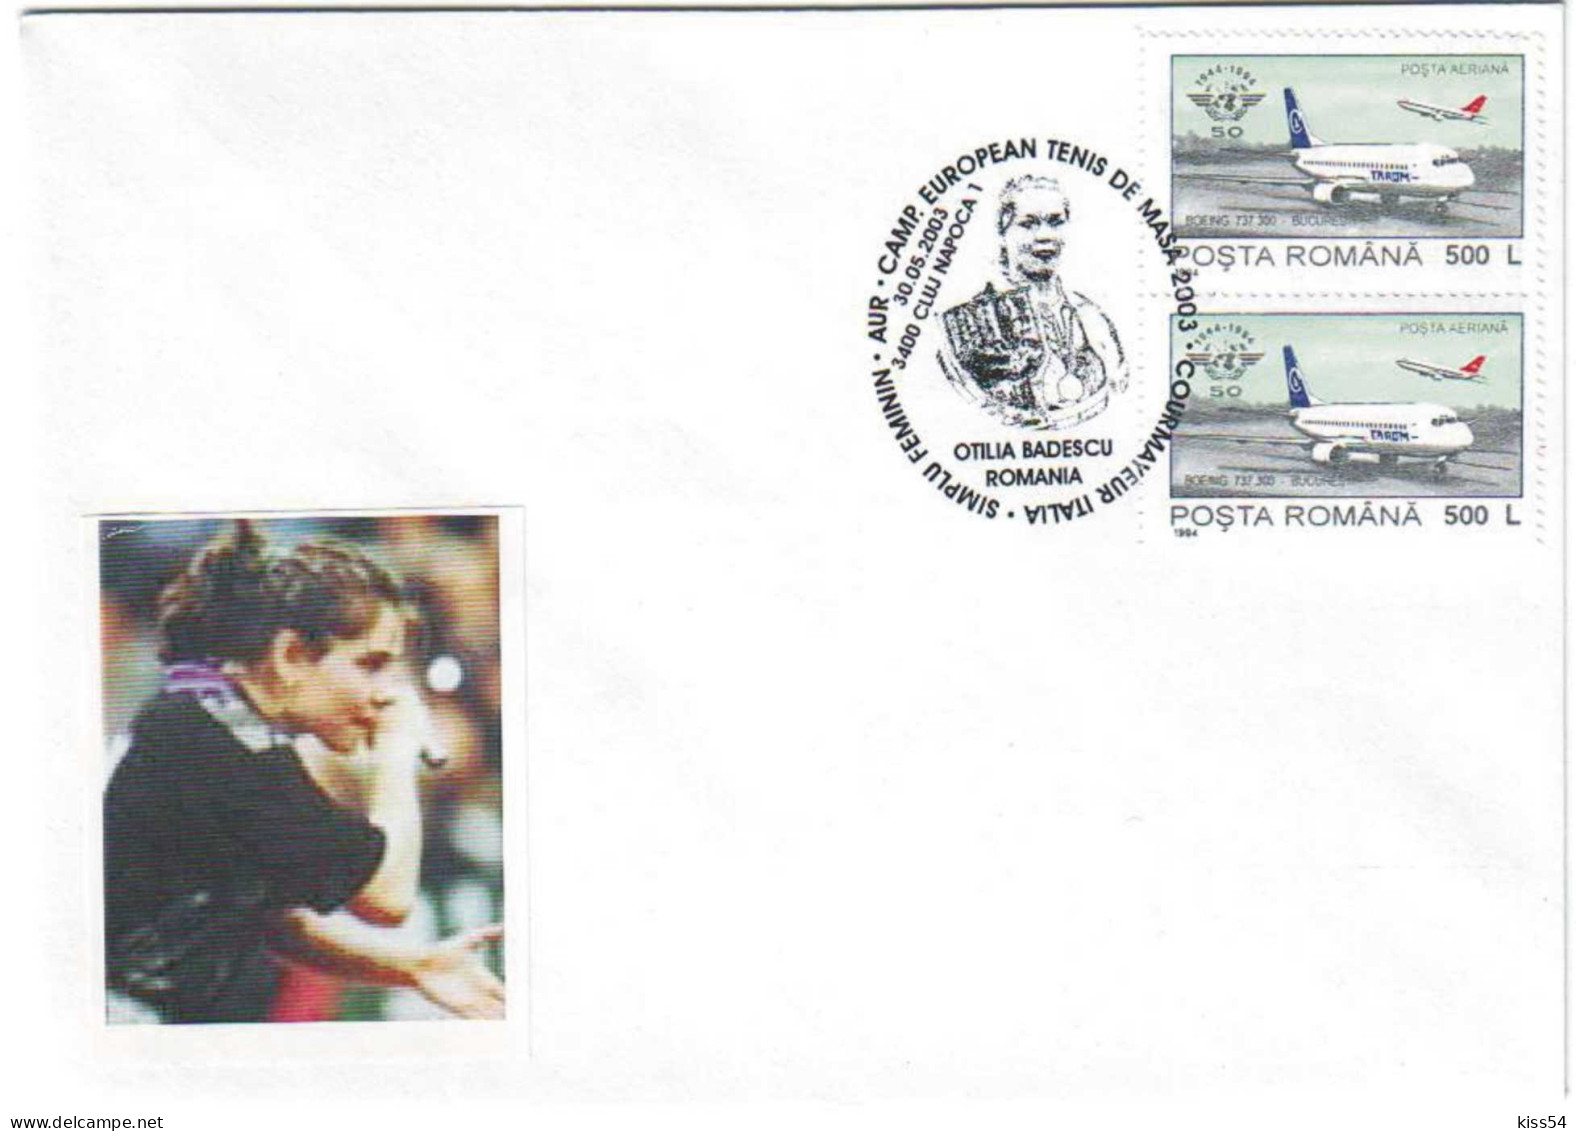 COV 95 - 272 European Women's Table Tennis Championship ITALY, Romania - Cover - Used - 2003 - Lettres & Documents